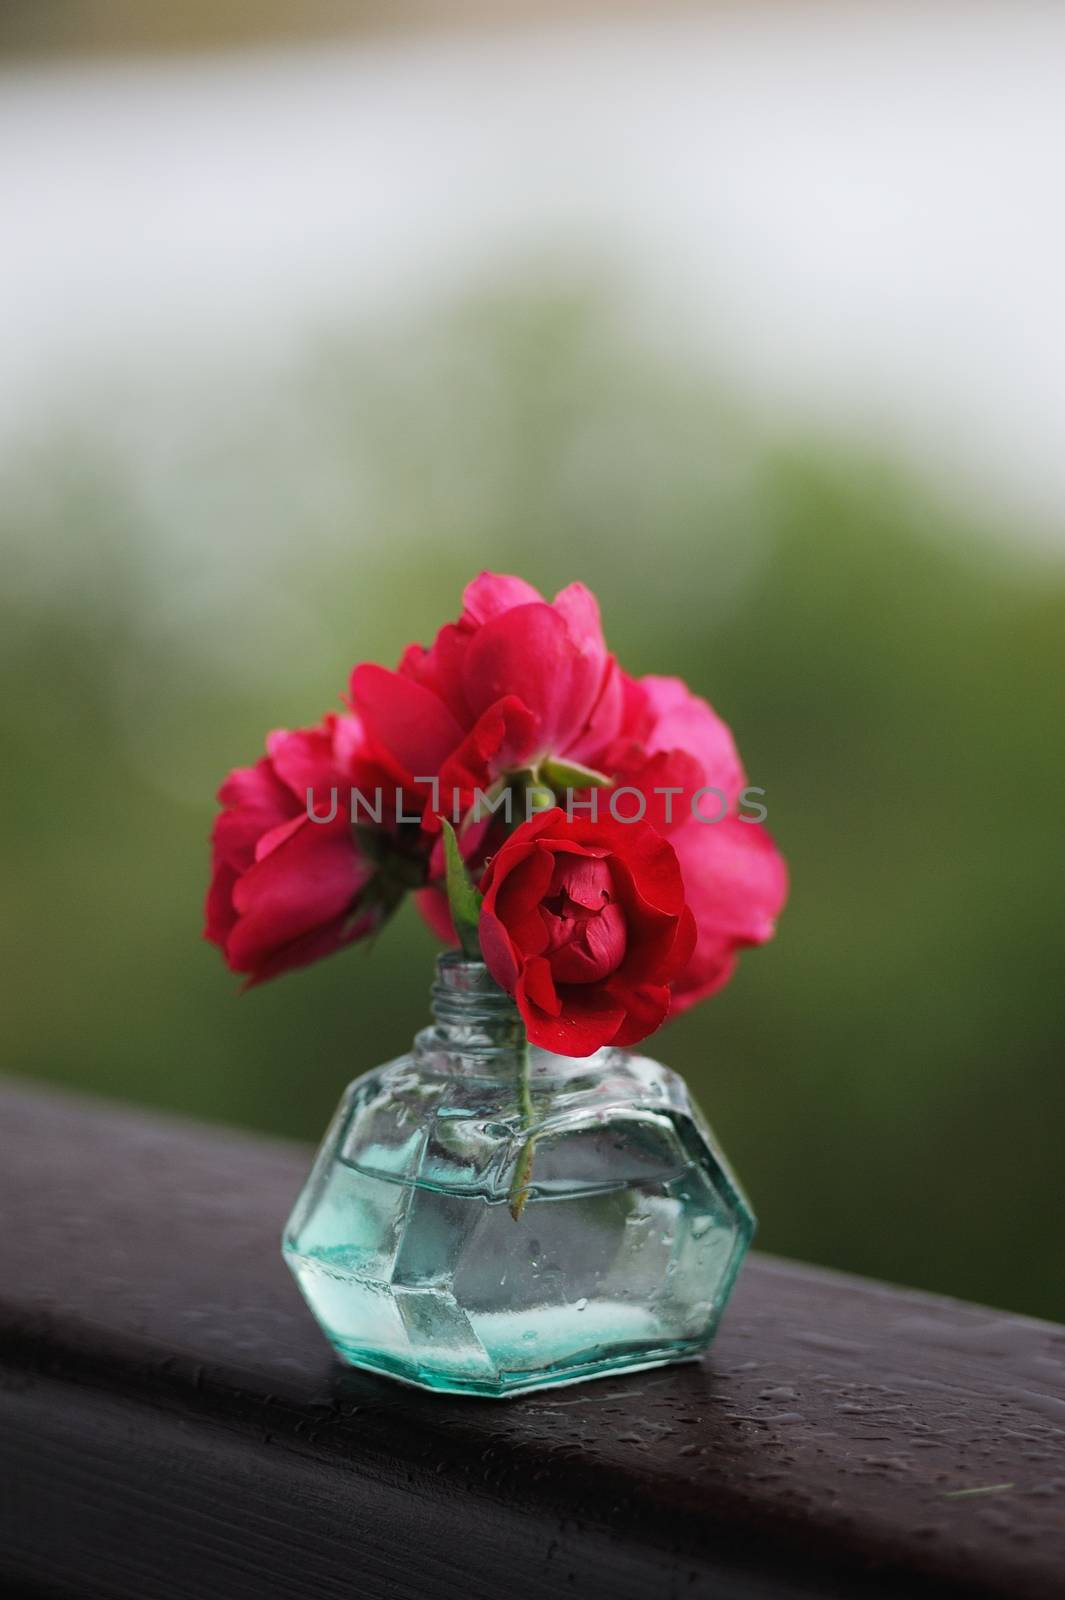 Wild red roses in turquoise glass vase with rain drops vertical